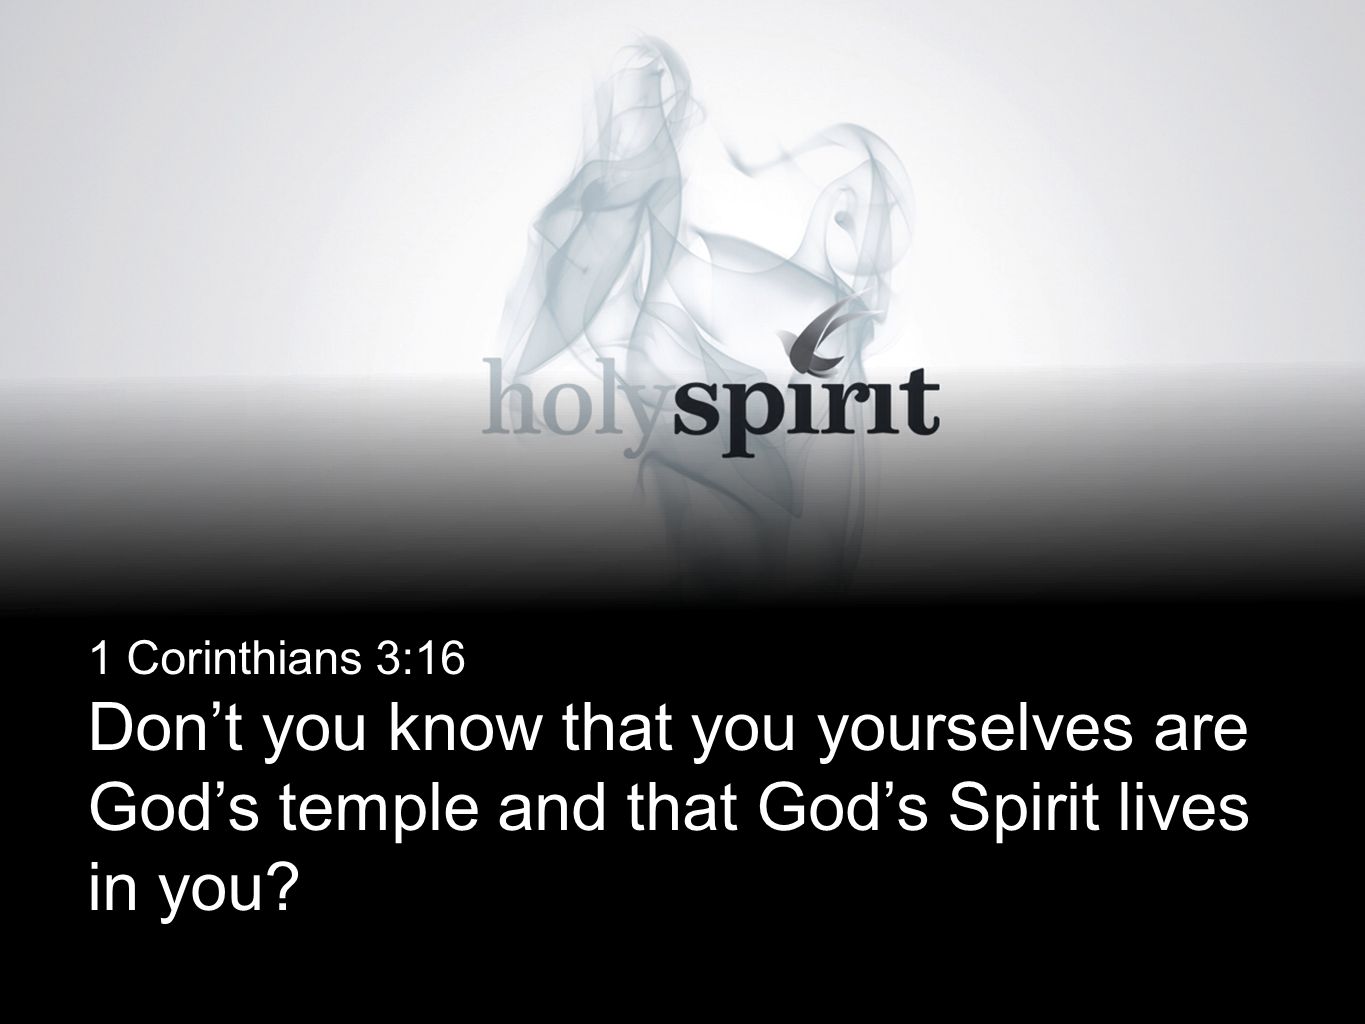 1 Corinthians 3:16 Don’t you know that you yourselves are God’s temple and that God’s Spirit lives in you